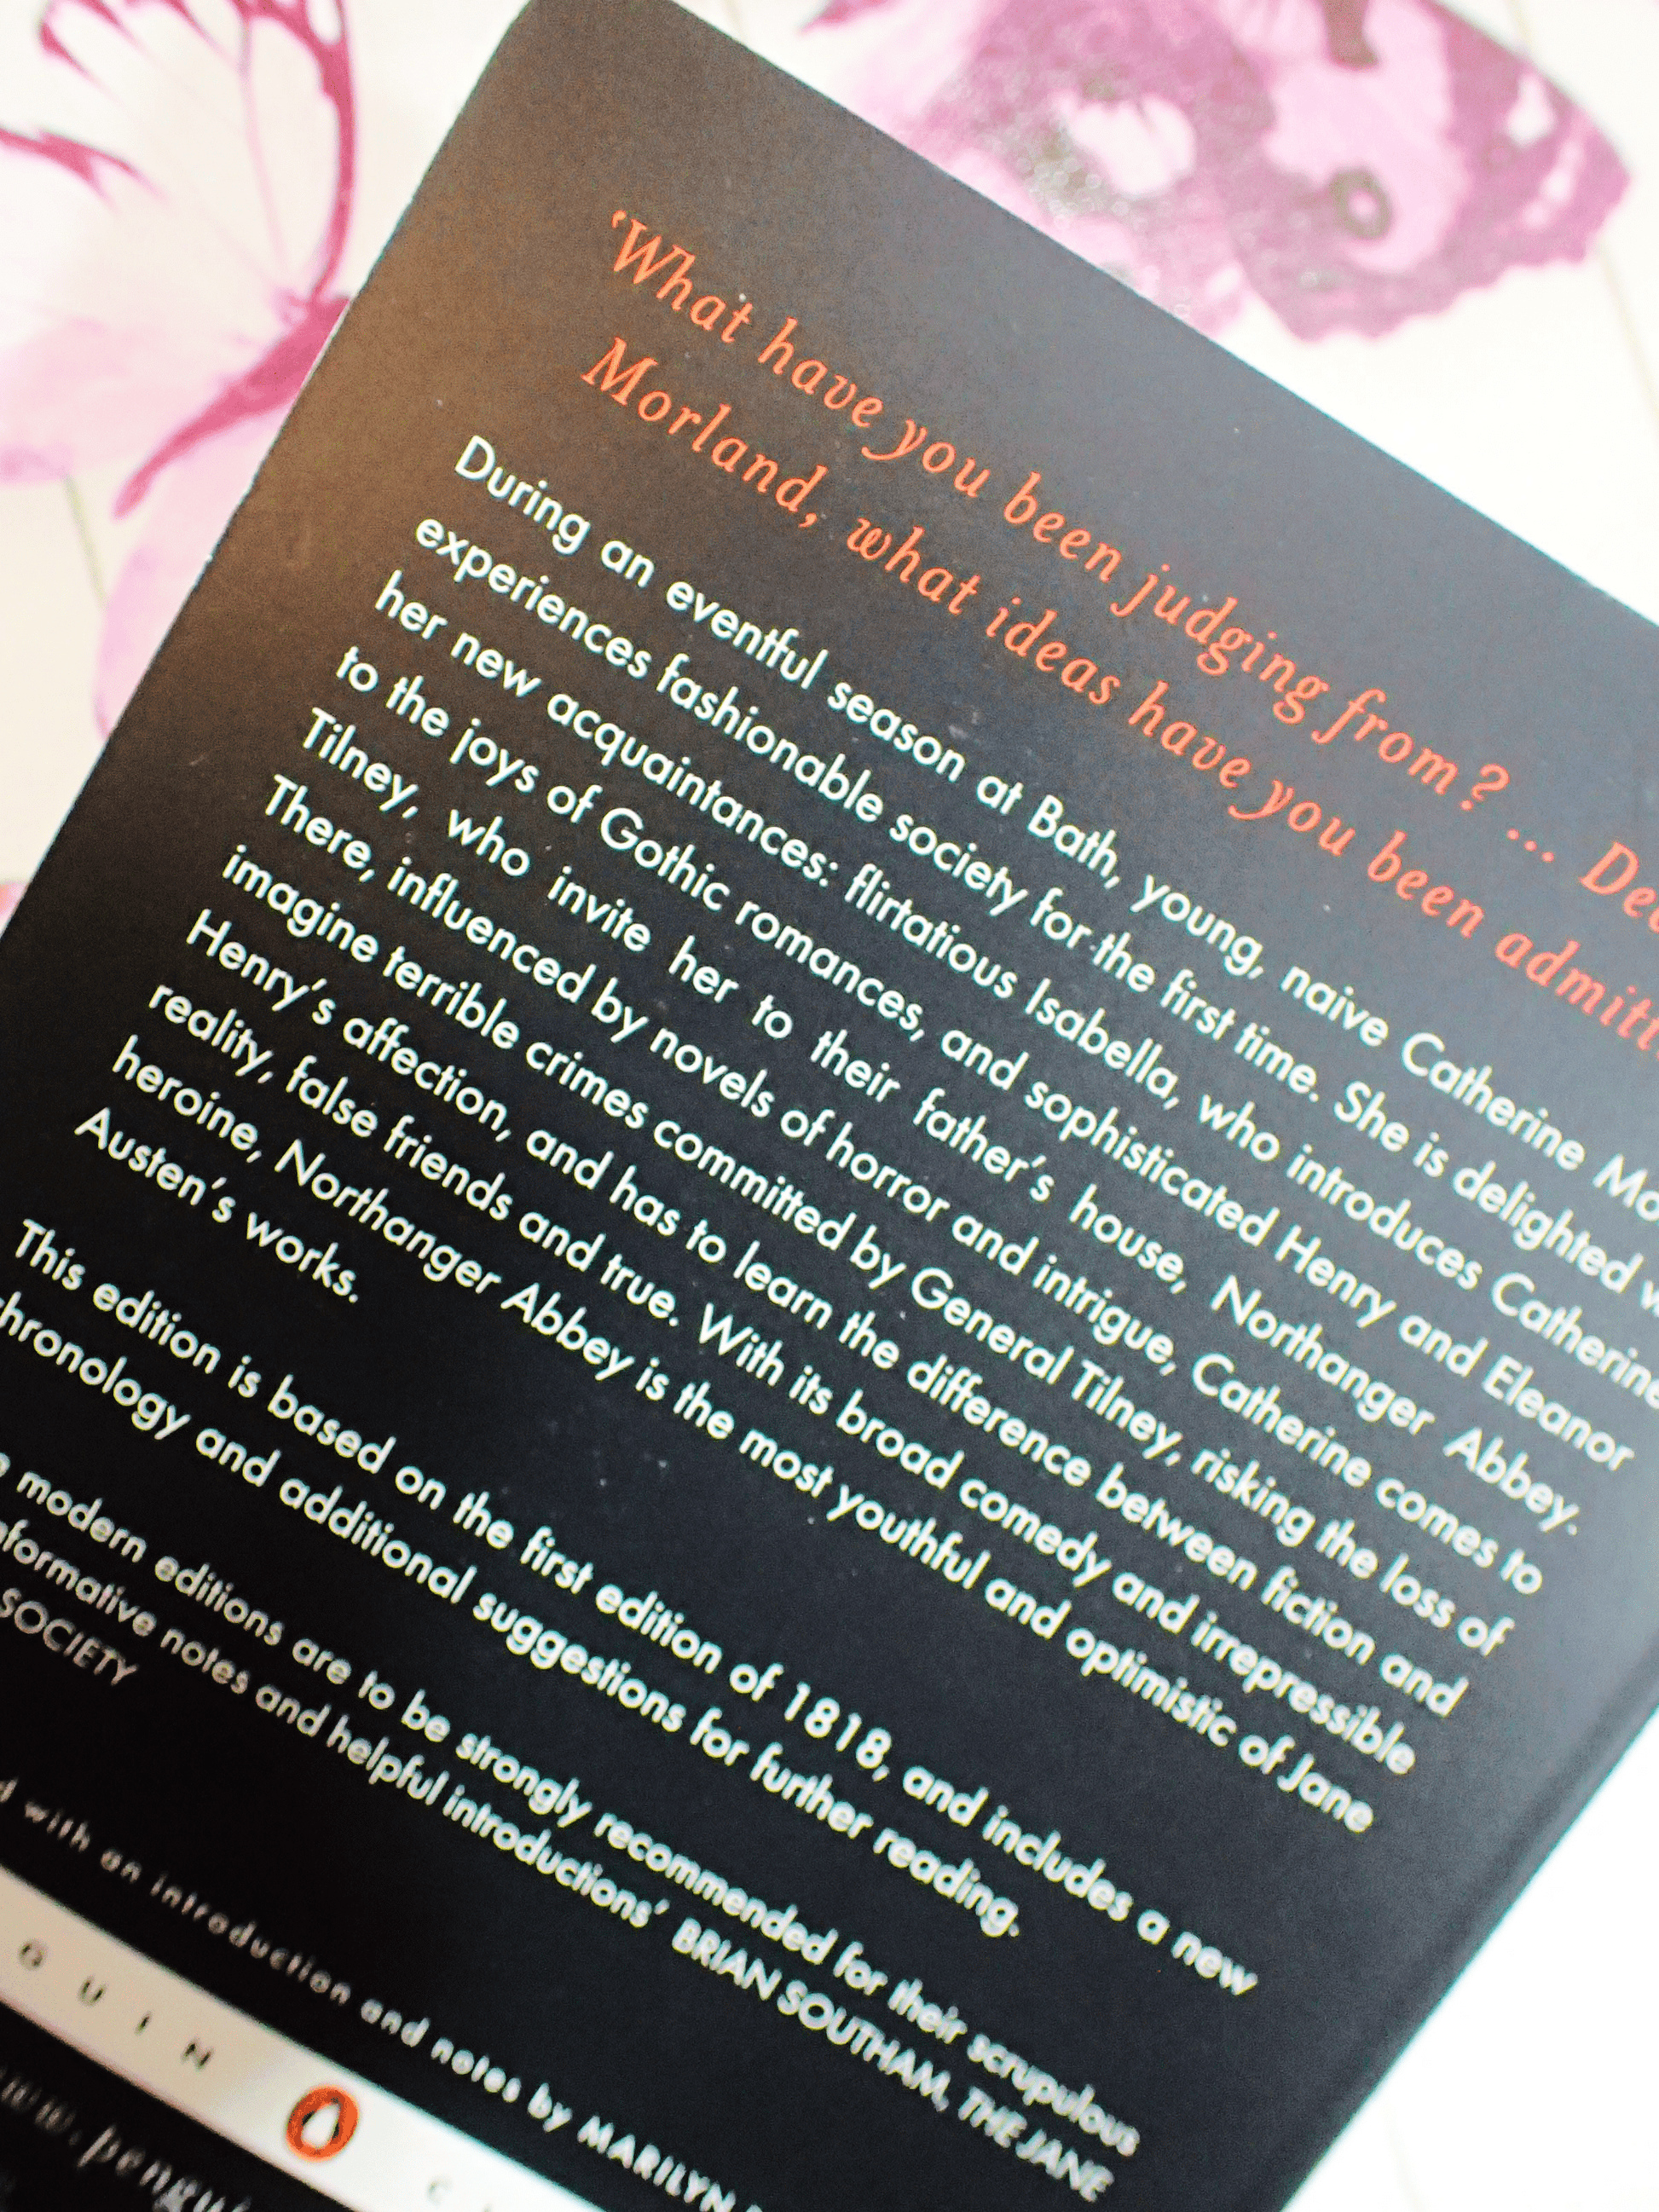 Blurb on back cover of Northanger Abbey Jane Austen Puffin Paperback showing text: During an eventful season at Bath, young, naive Catherine...